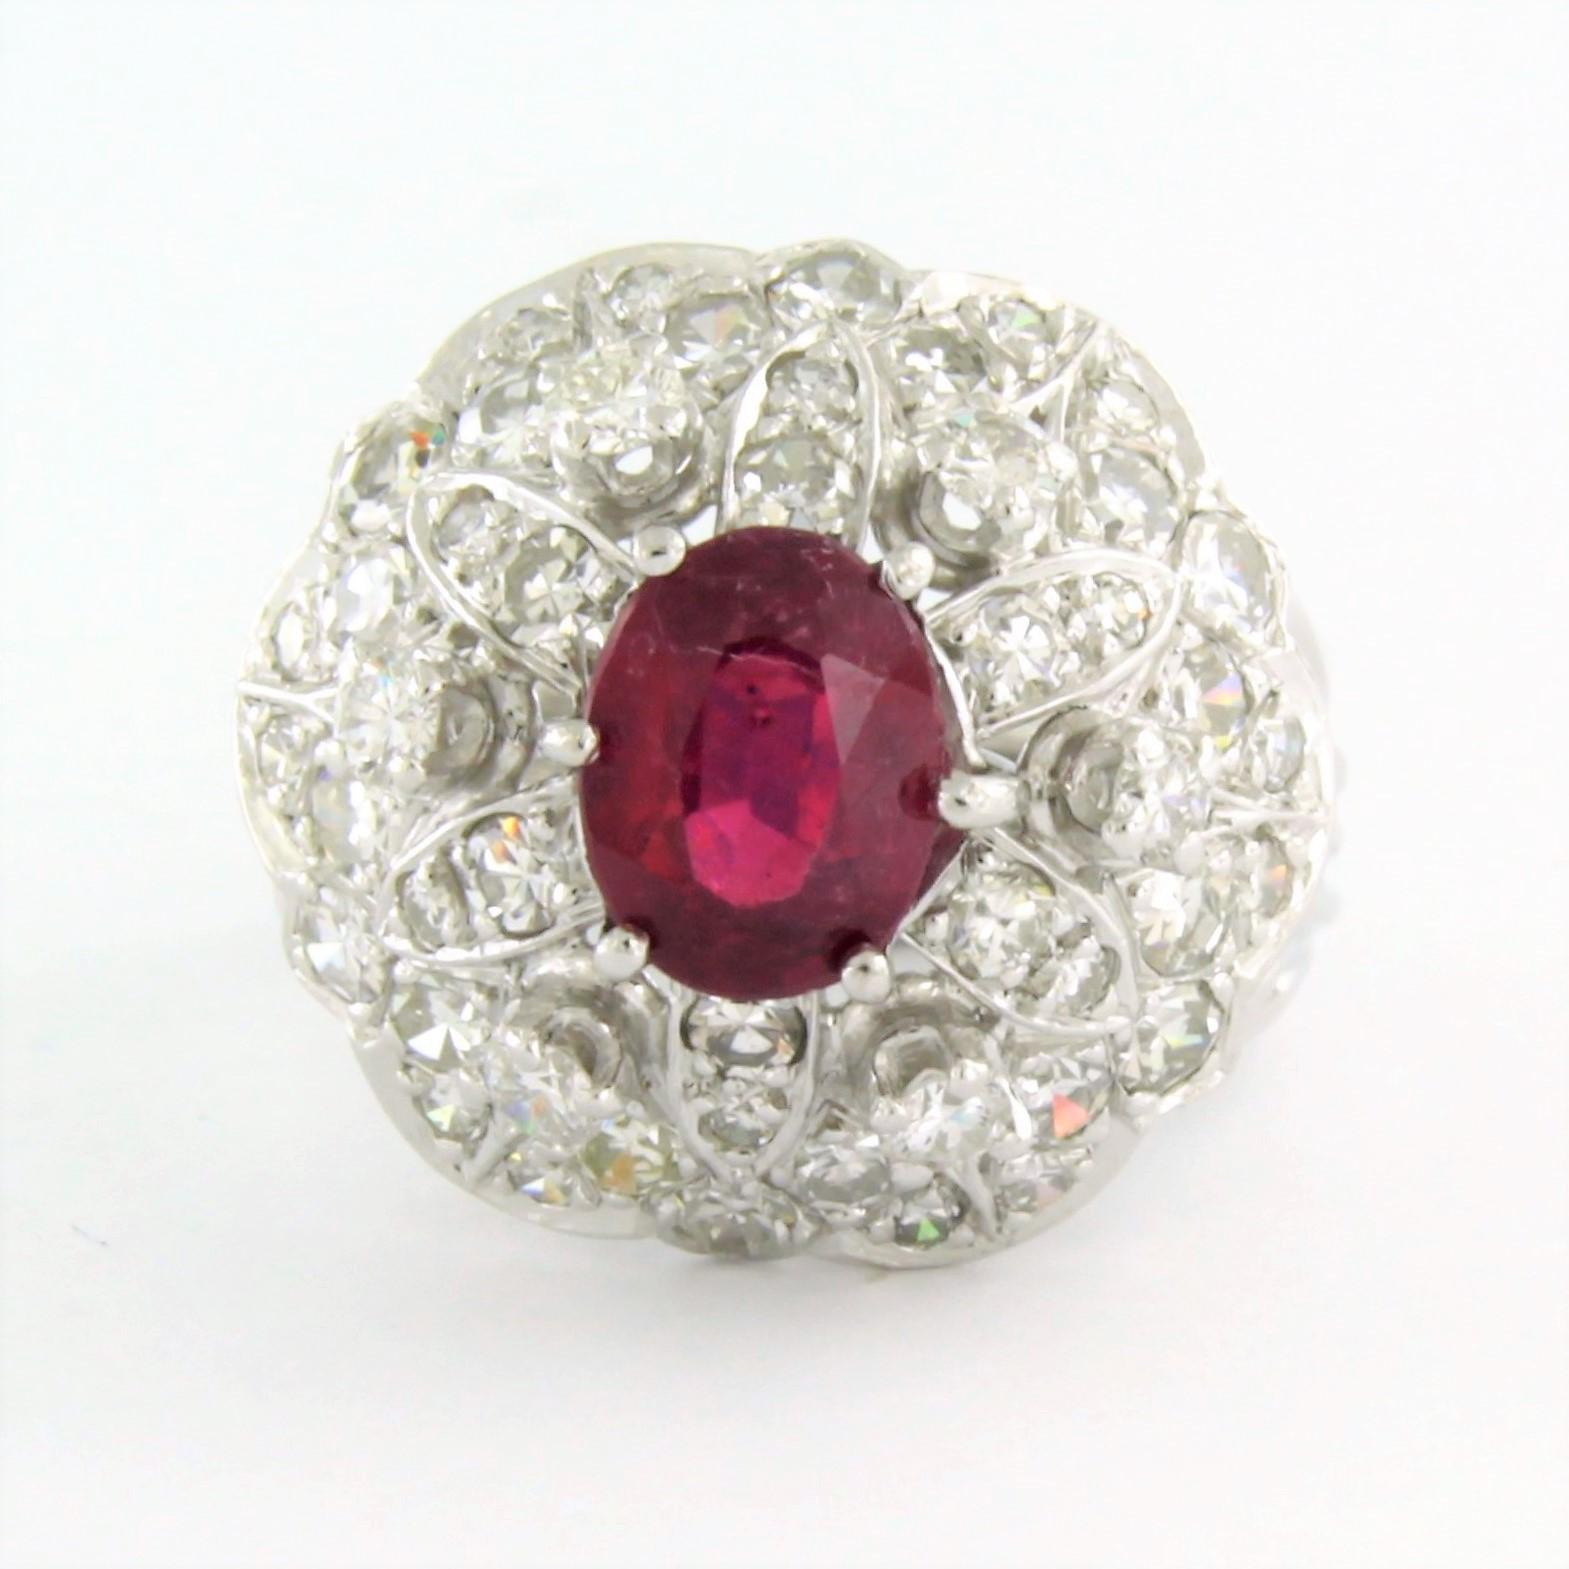 Platinum ring set with a ruby ​​in the center. 1.05ct and around brilliant and single cut diamonds up to. 1.00ct - F/G - VS/SI - ring size U.S. 5.25 - EU. 16 (50)

detailed description:

the top of the ring is 1.7 cm wide by 1.1 cm high

weight 10.2